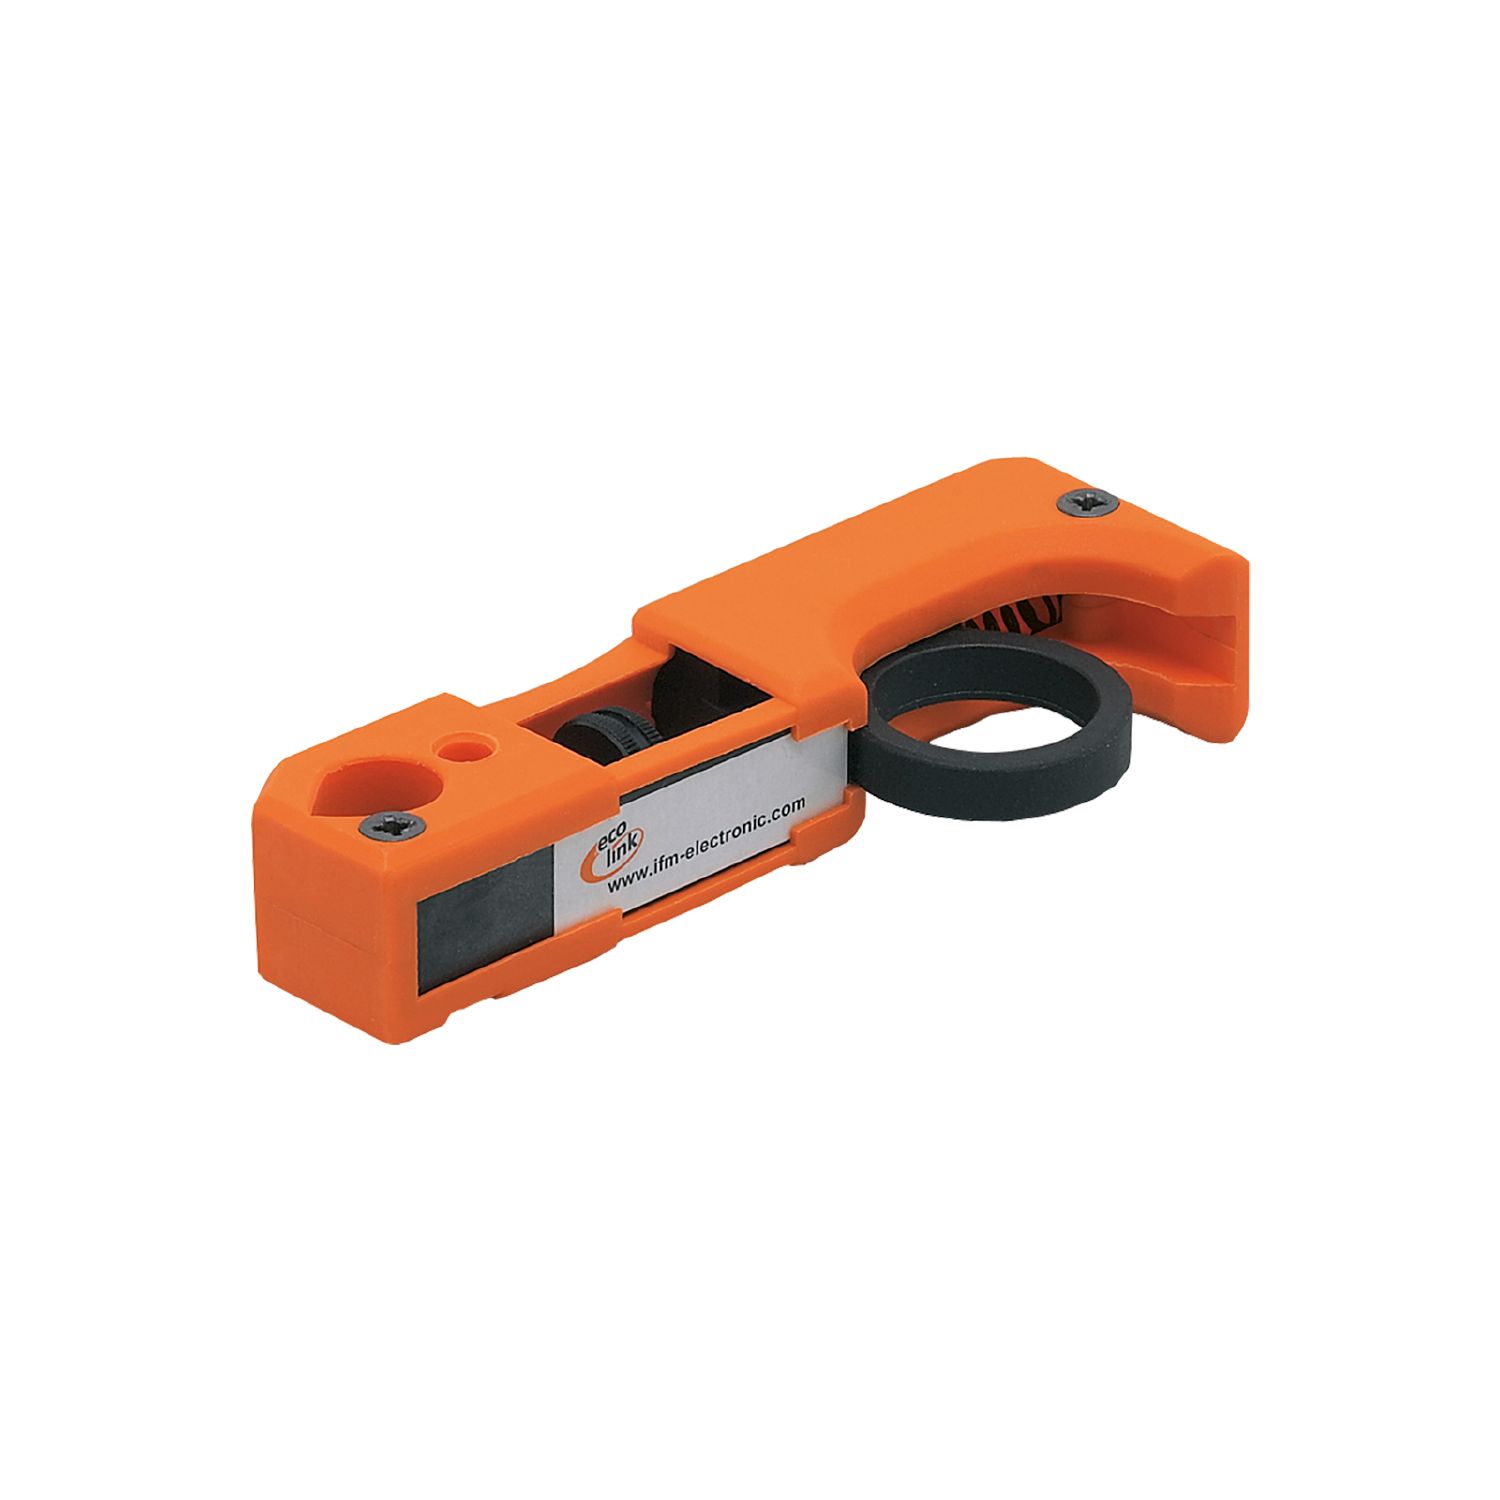 E11952 - Wire stripping tool - ifm